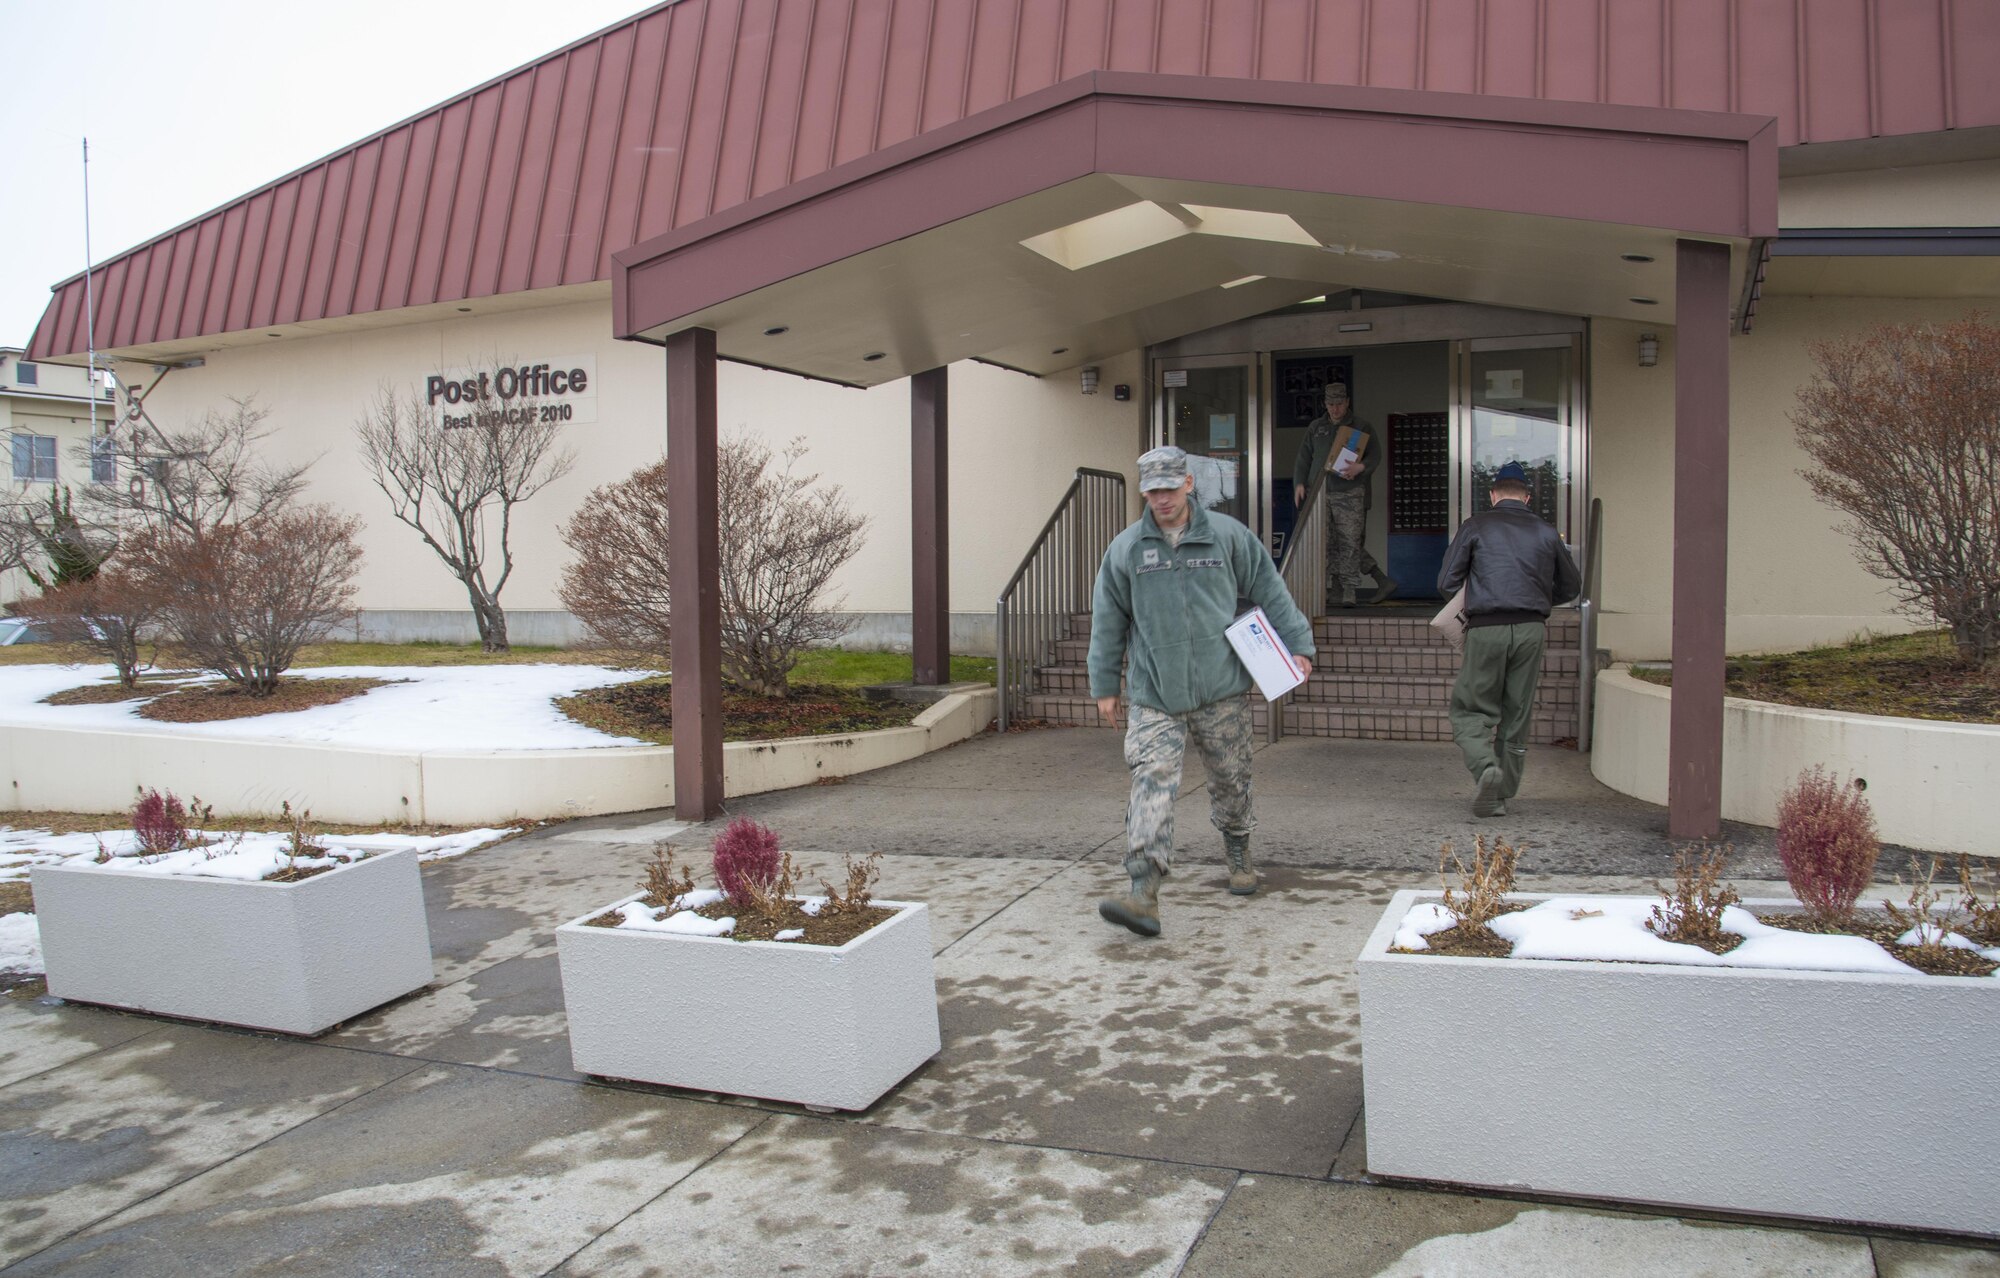 U.S Air Force Senior Airman Edwin Cajigas-Olavarria, the 35th Maintenance Operations Squadron munitions inspector, walks away from a post office at Misawa Air Base, Japan, Dec. 15, 2016. Misawa’s post office receives three trucks daily with a multitude of packages and mail from all over the world. Once everything is unloaded, approximately 20 Airmen sort and scan items into their system. (U.S. Air Force photo by Airman 1st Class Sadie Colbert)